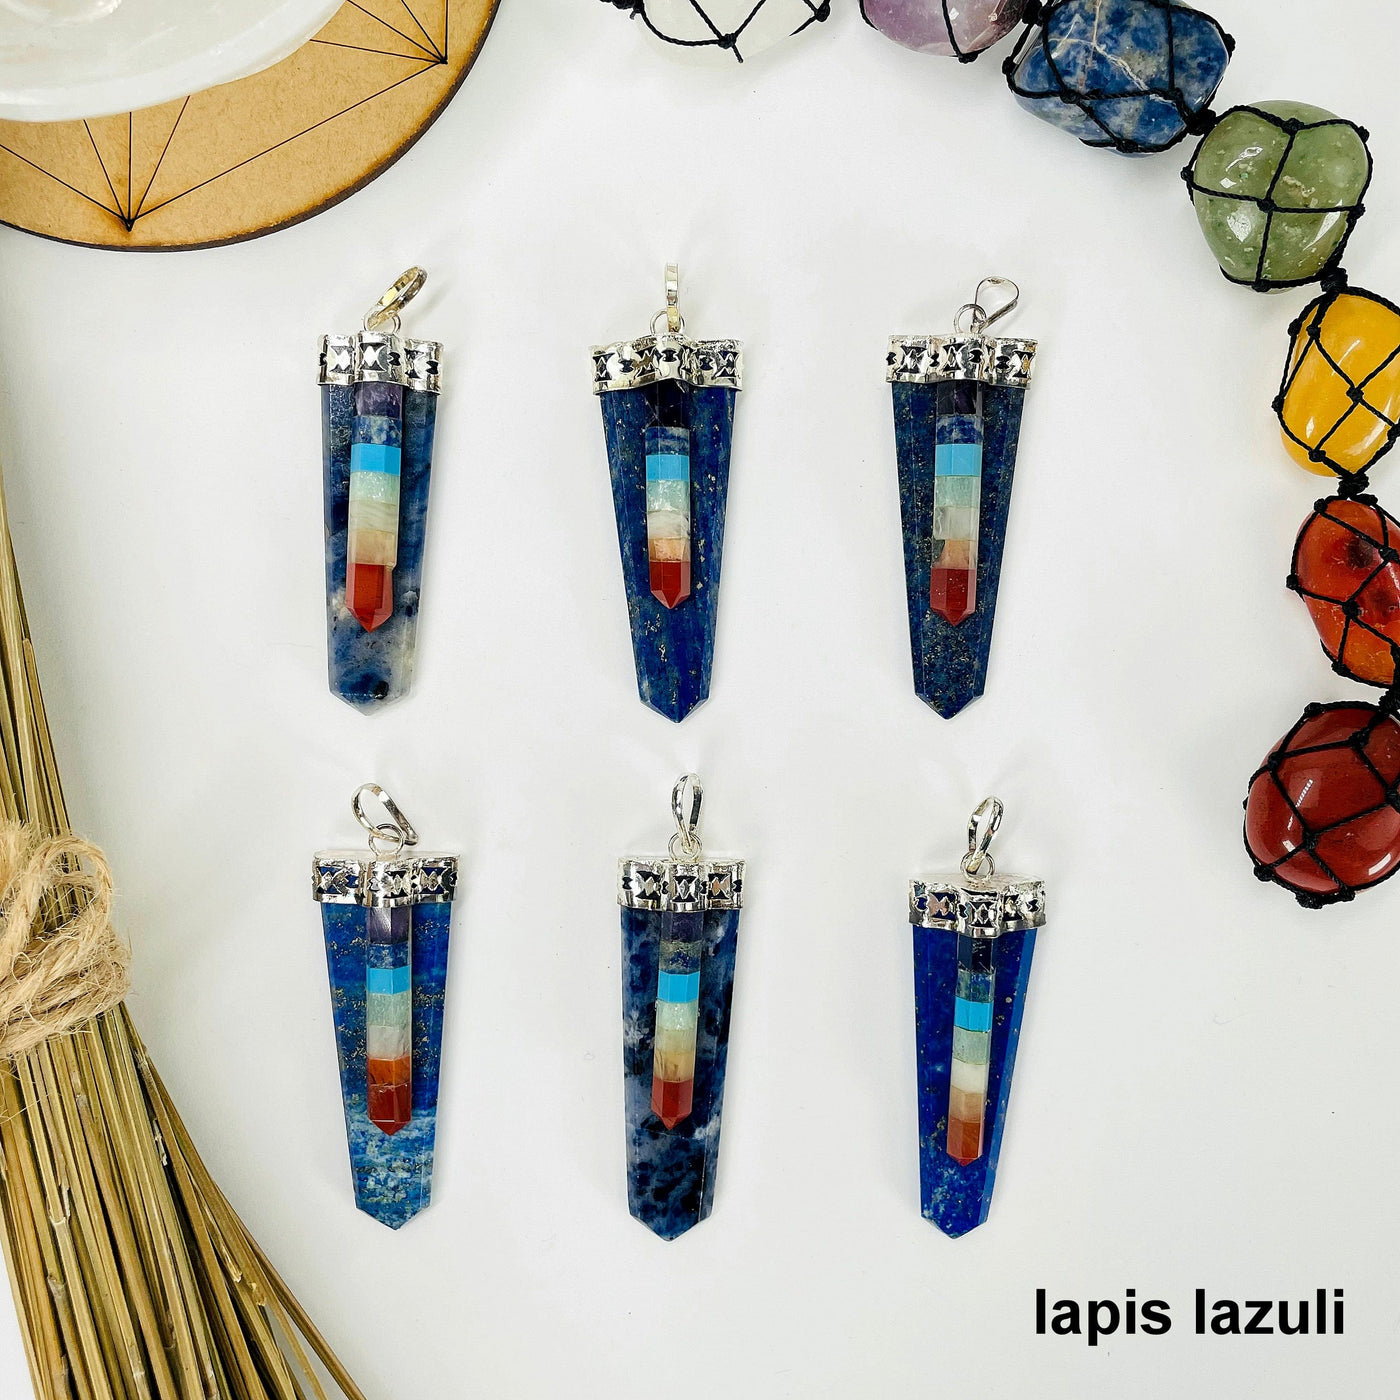 overhead view of six lapis lazuli polished point pendants with chakra point accents on white background with decorations for possible variations